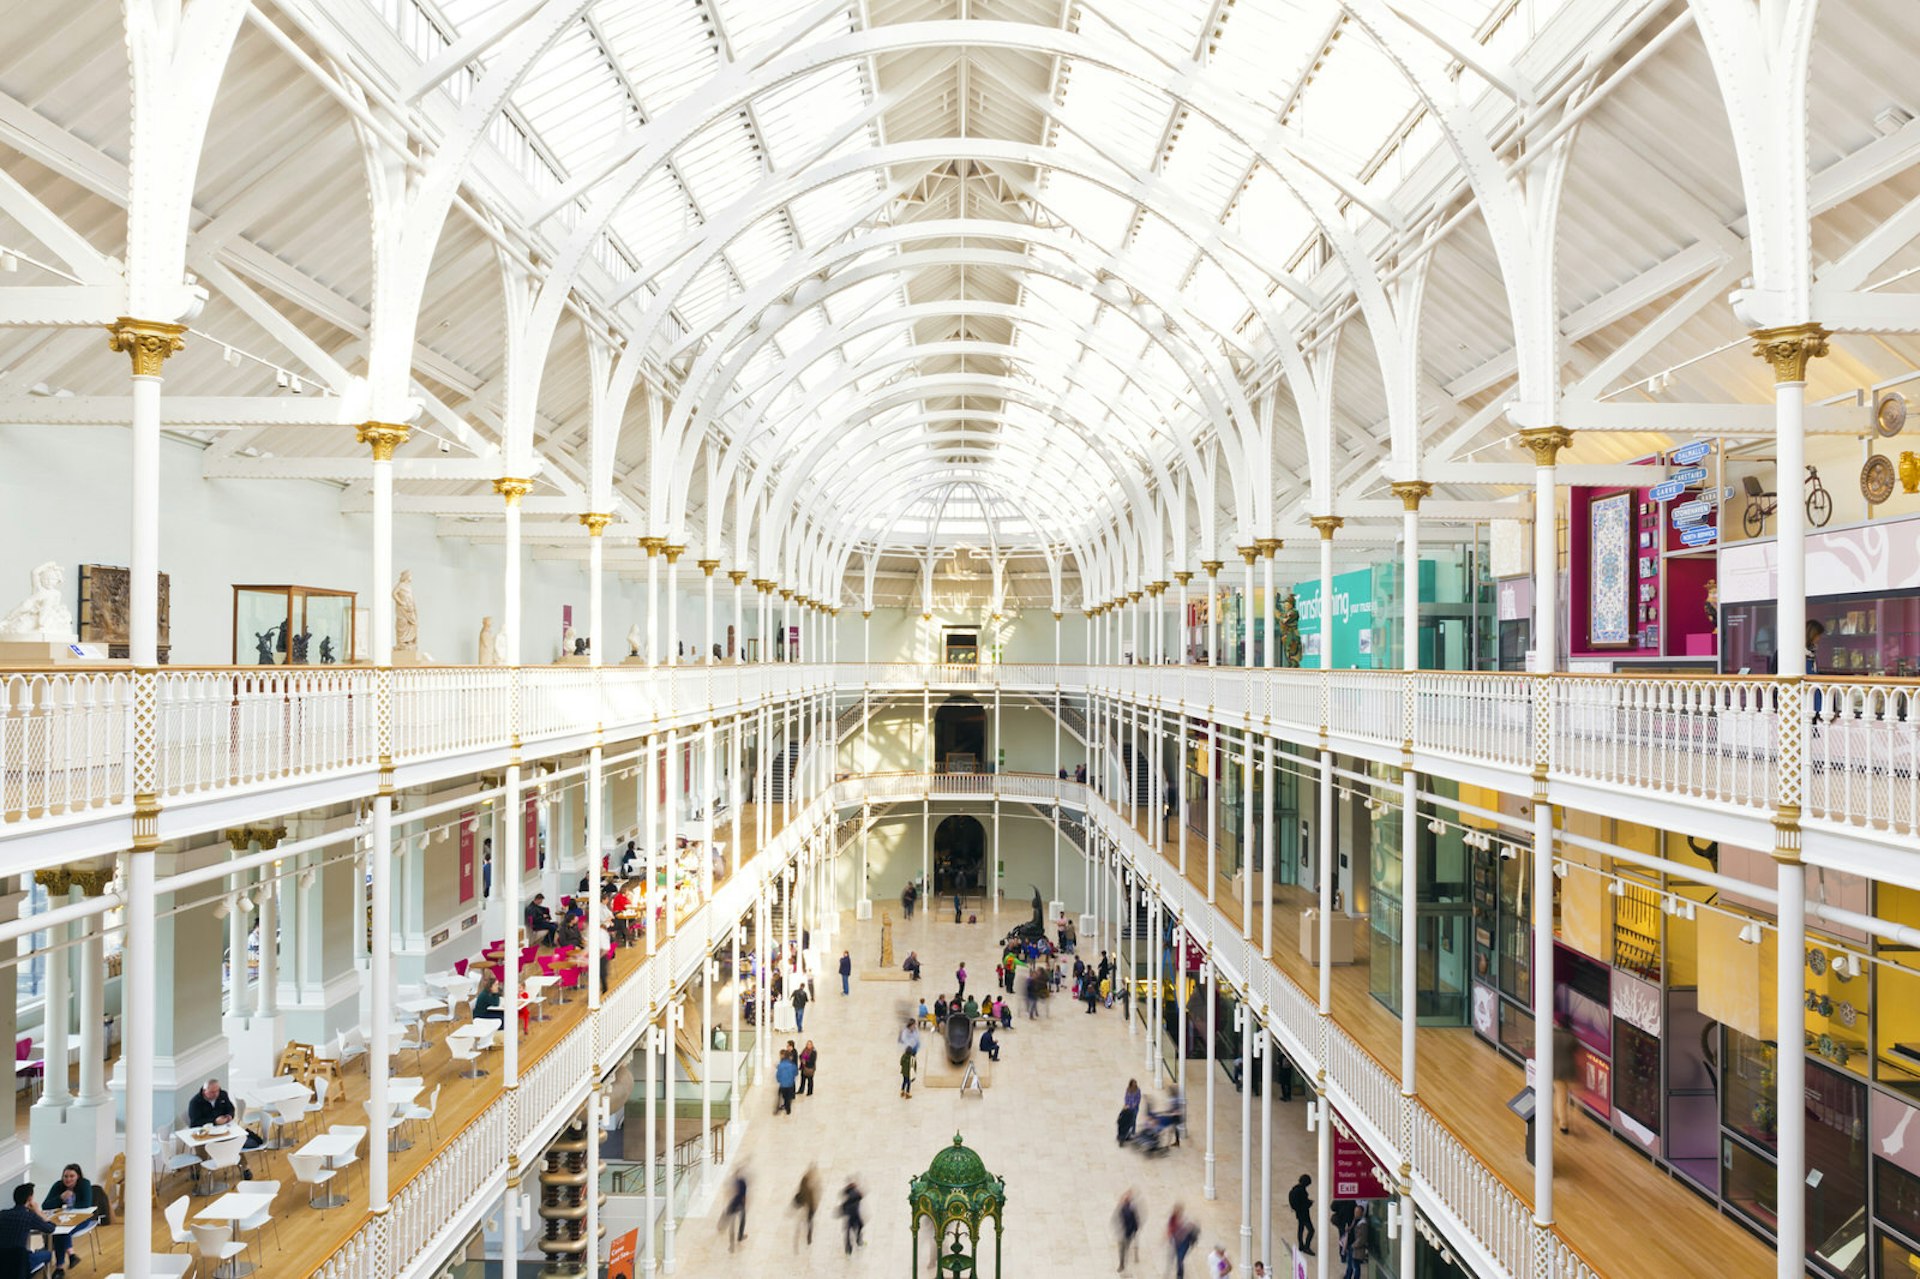 The National Museum of Scotland's Grand Gallery lives up to its name © Future Light / Getty Images